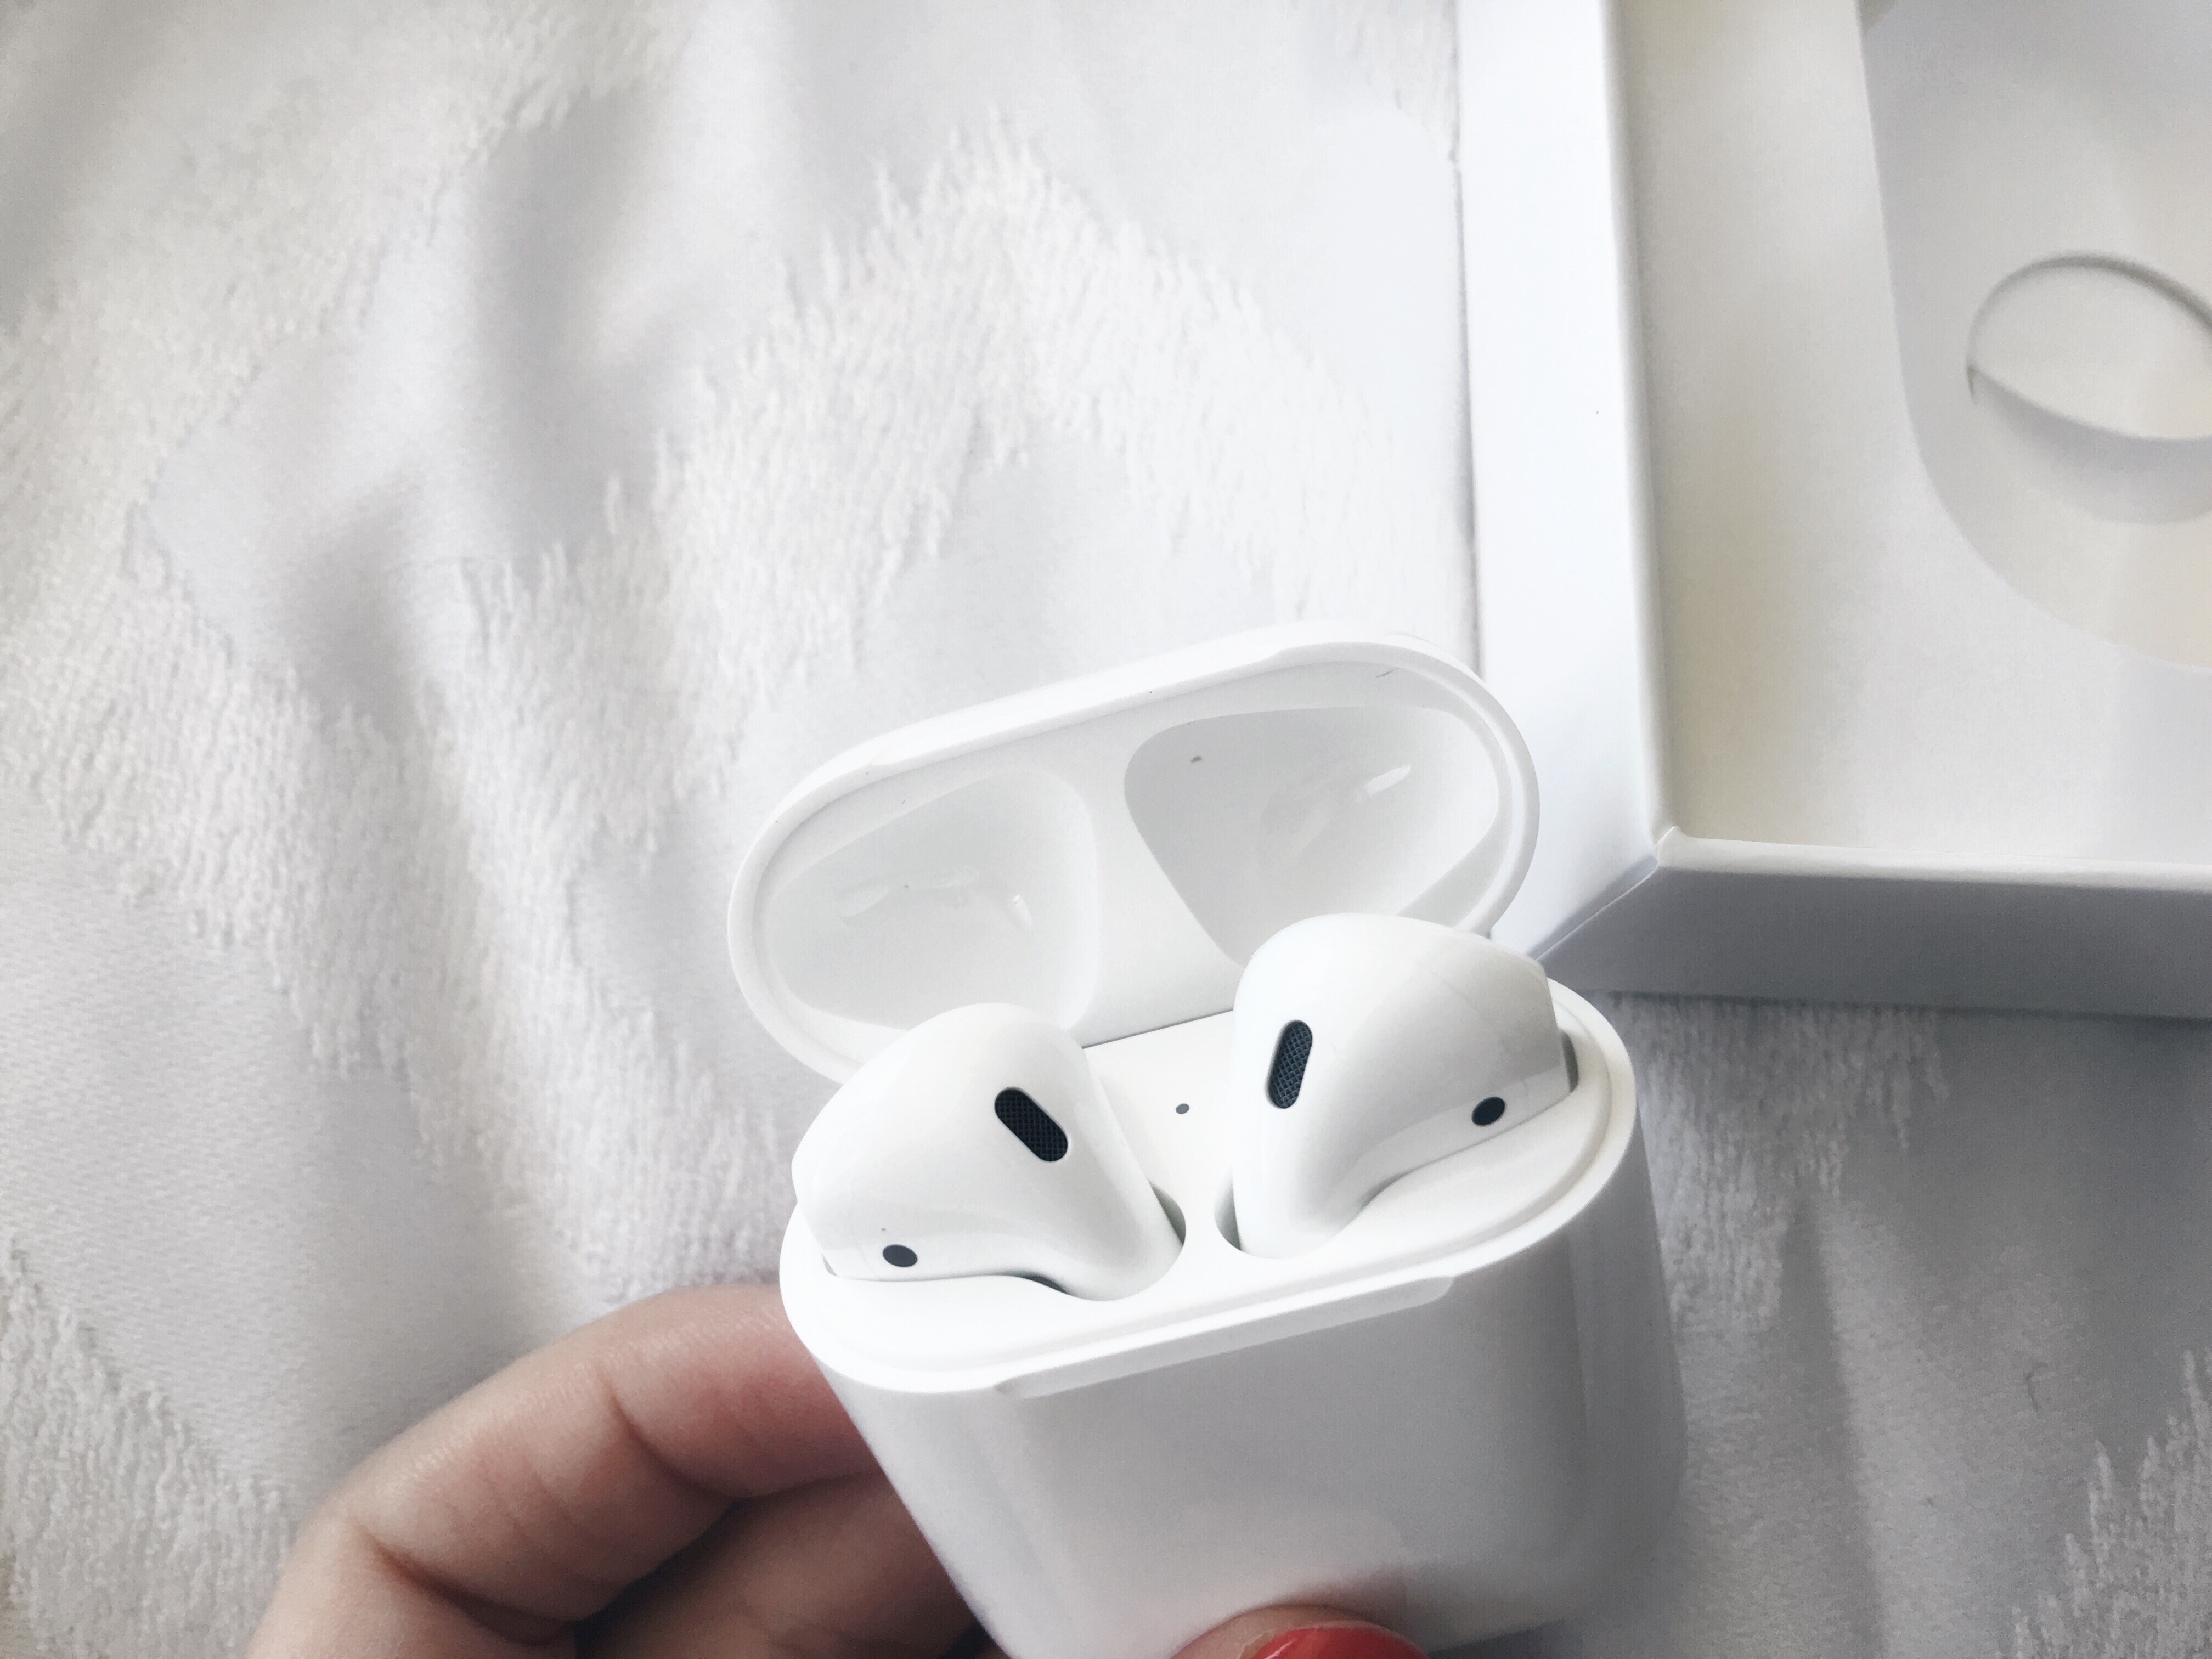 Drea Marie shares whether Apple's AirPods are worth it or not. She breaks them down FOR REAL into pros and cons.